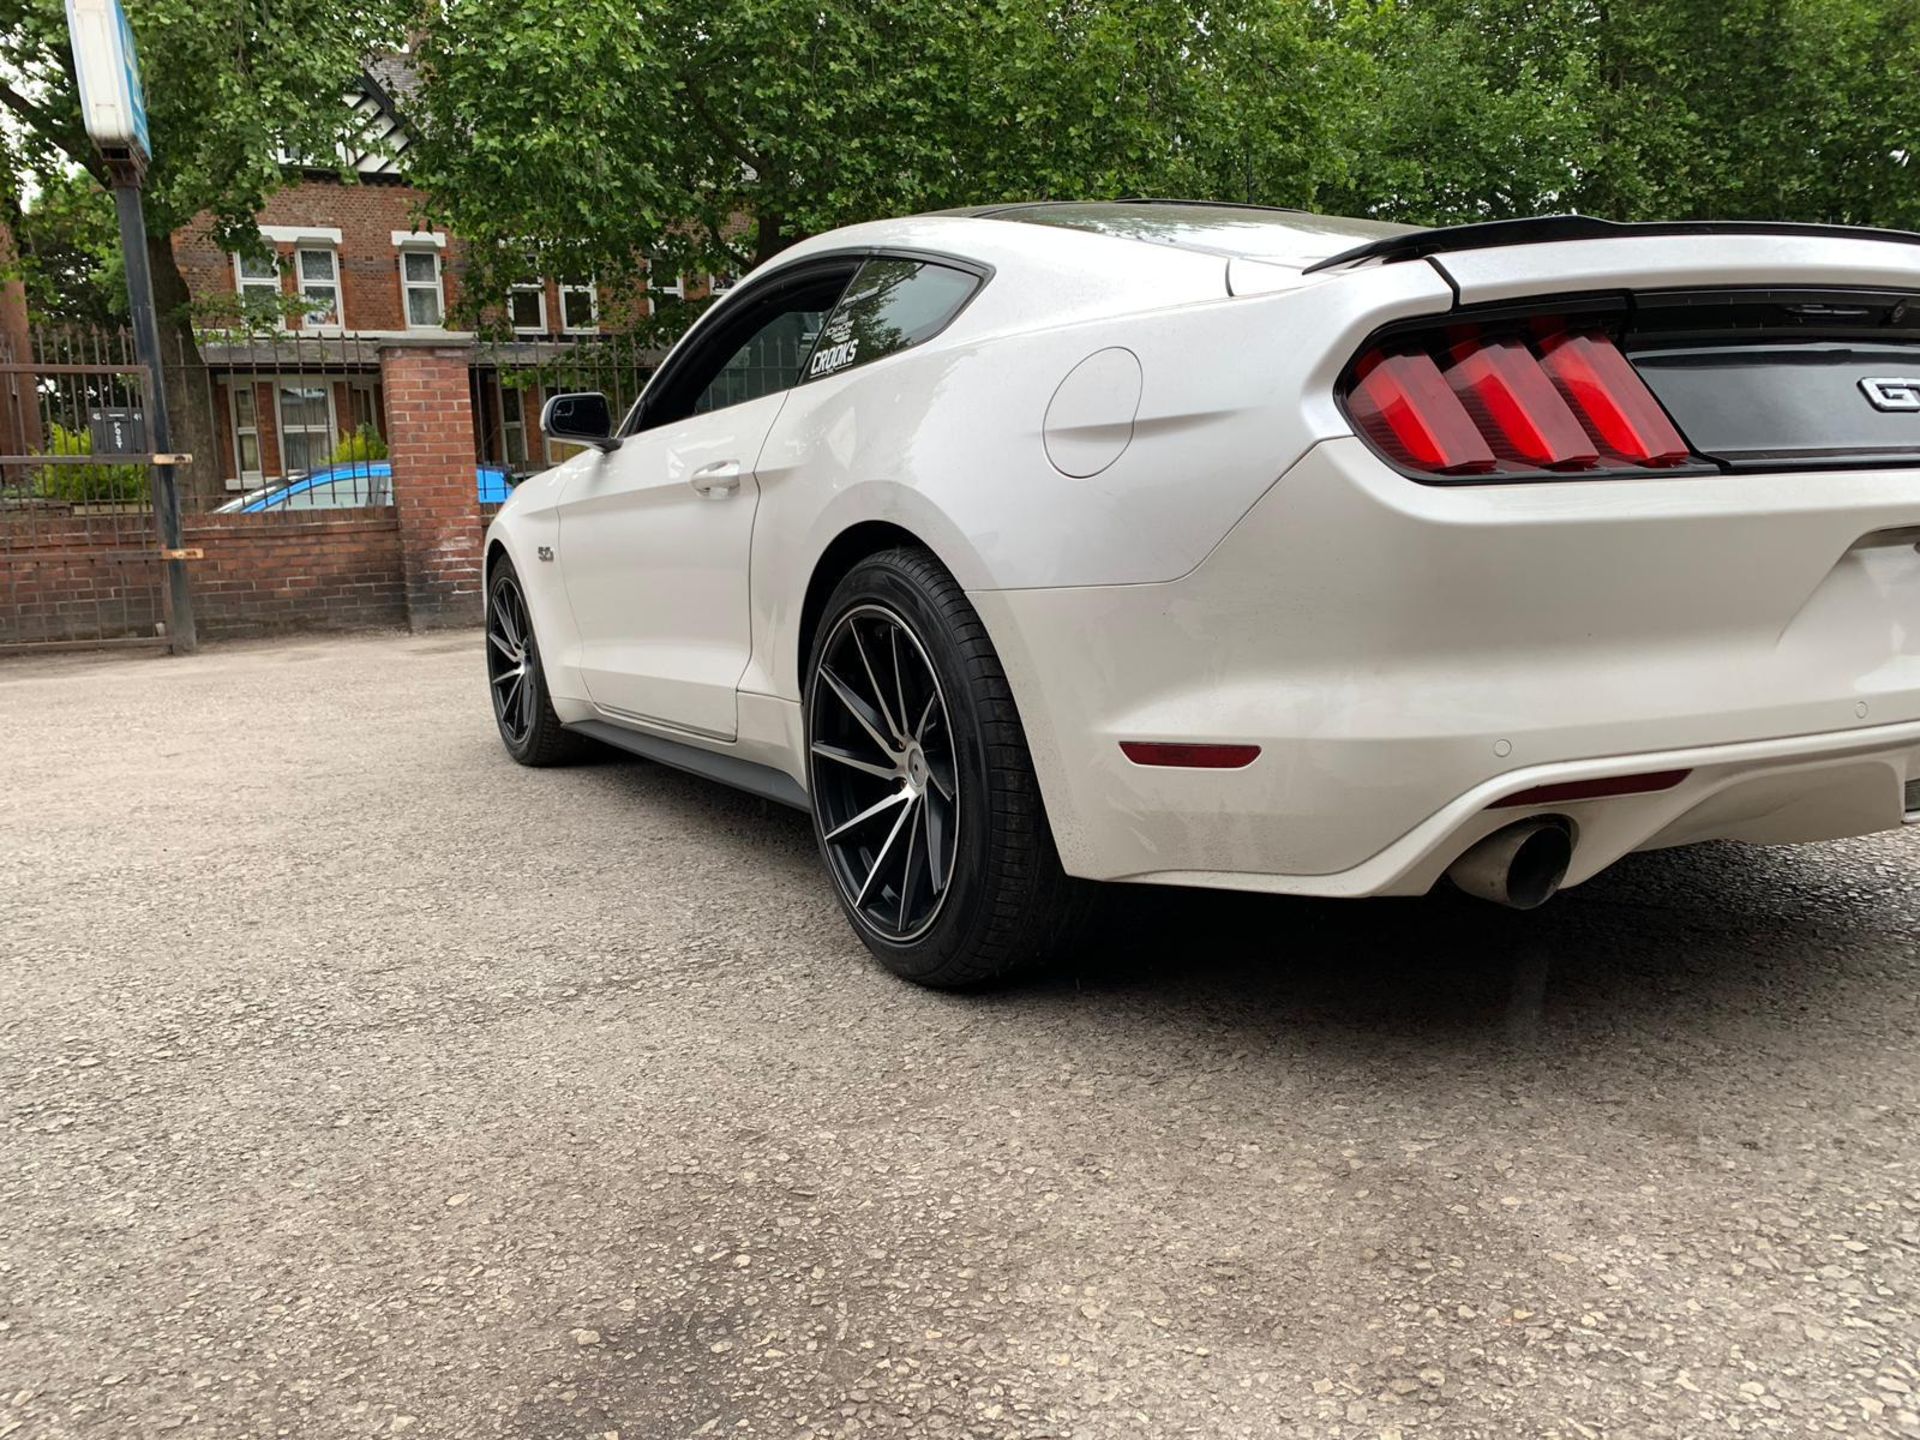 2018 MUSTANG 5.0 GT C8 MANUAL GEAR 15,000 MILES LEFT HAND DRIVE SOLD WITH NOVA *NO VAT* - Image 4 of 8